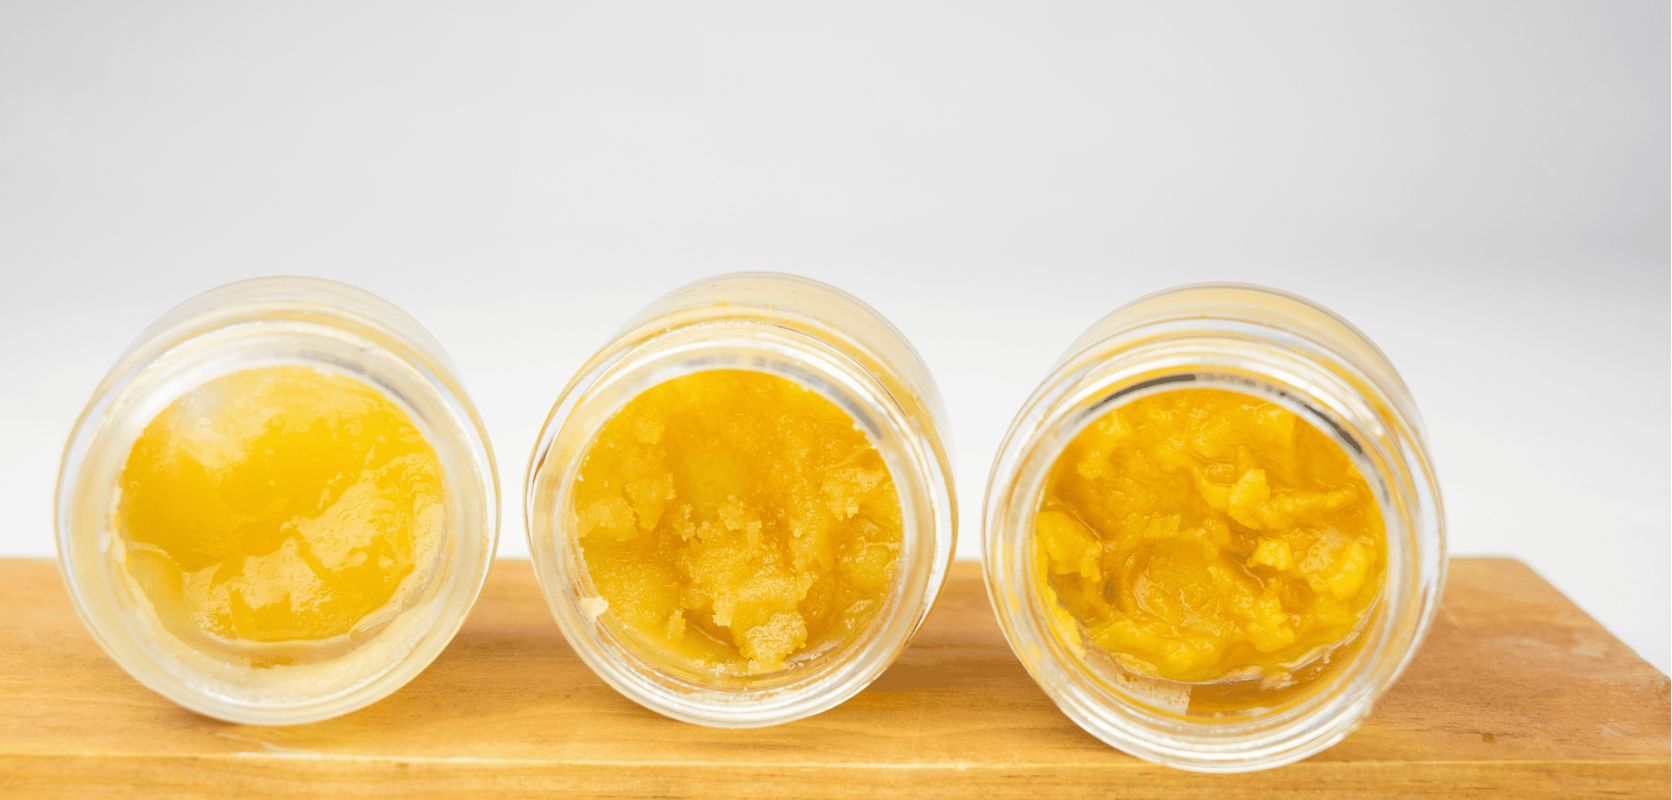 Weed budder or Canna butter is a cannabis concentrate, extracted from cannabis trims, that contains cannabinoids THC and CBD as well as terpenes. 